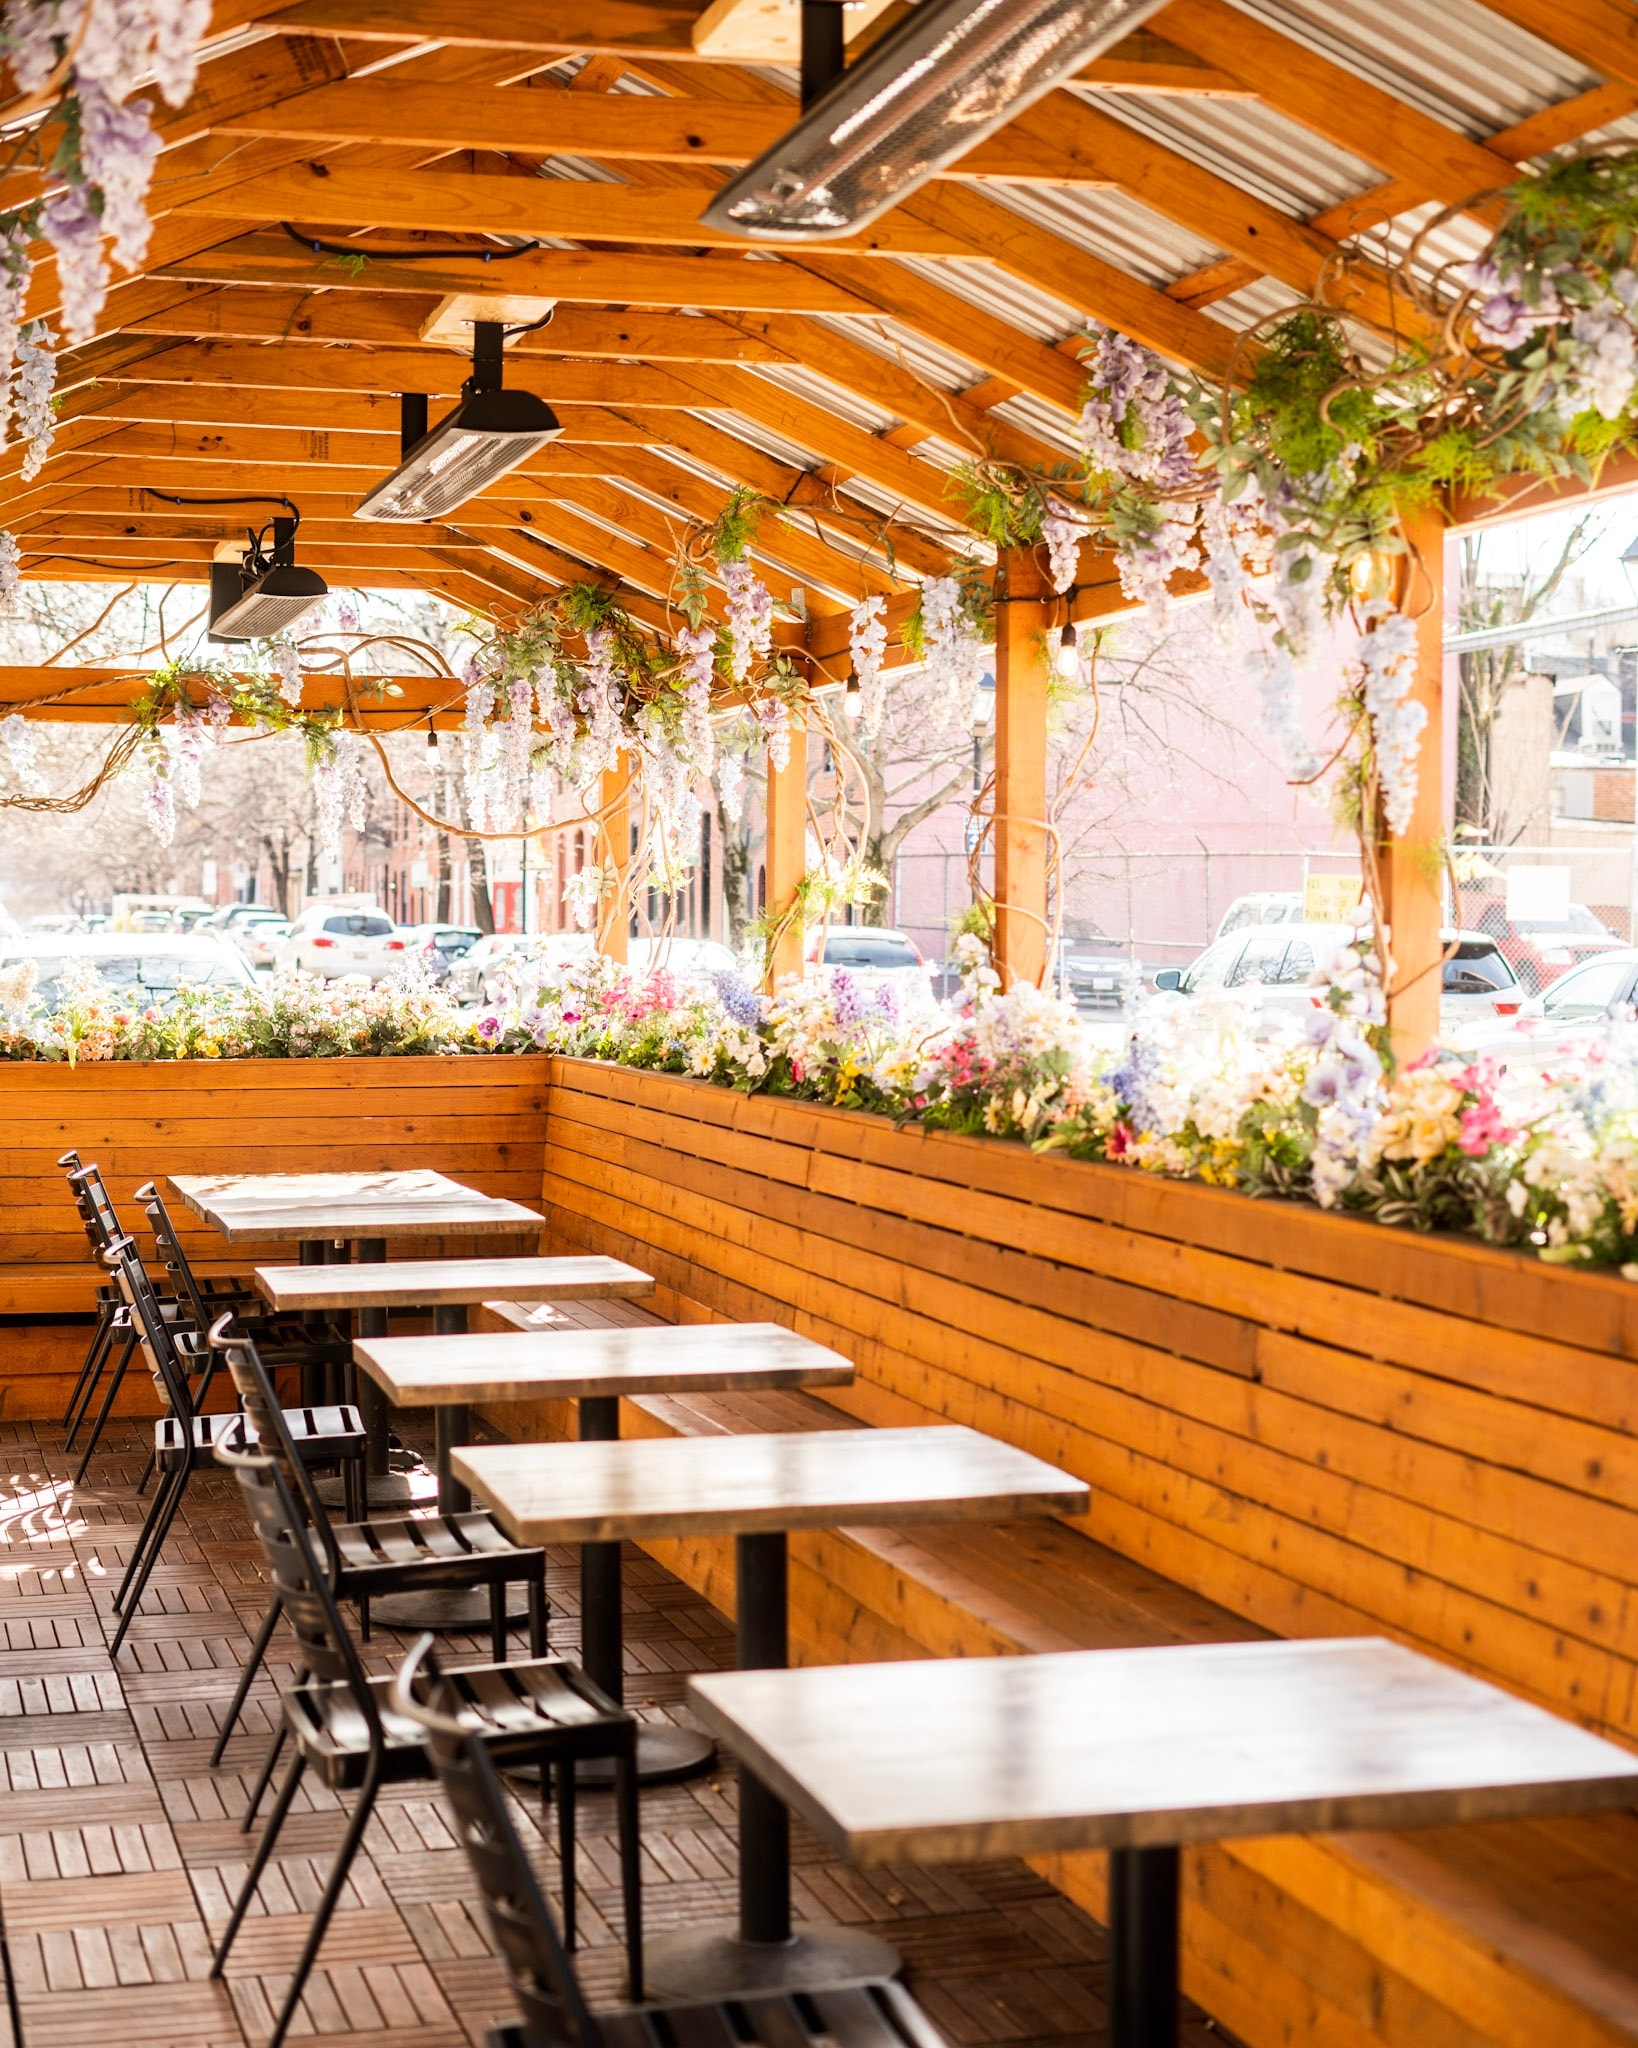 Outdoor seating under a pavilion covered in flowers